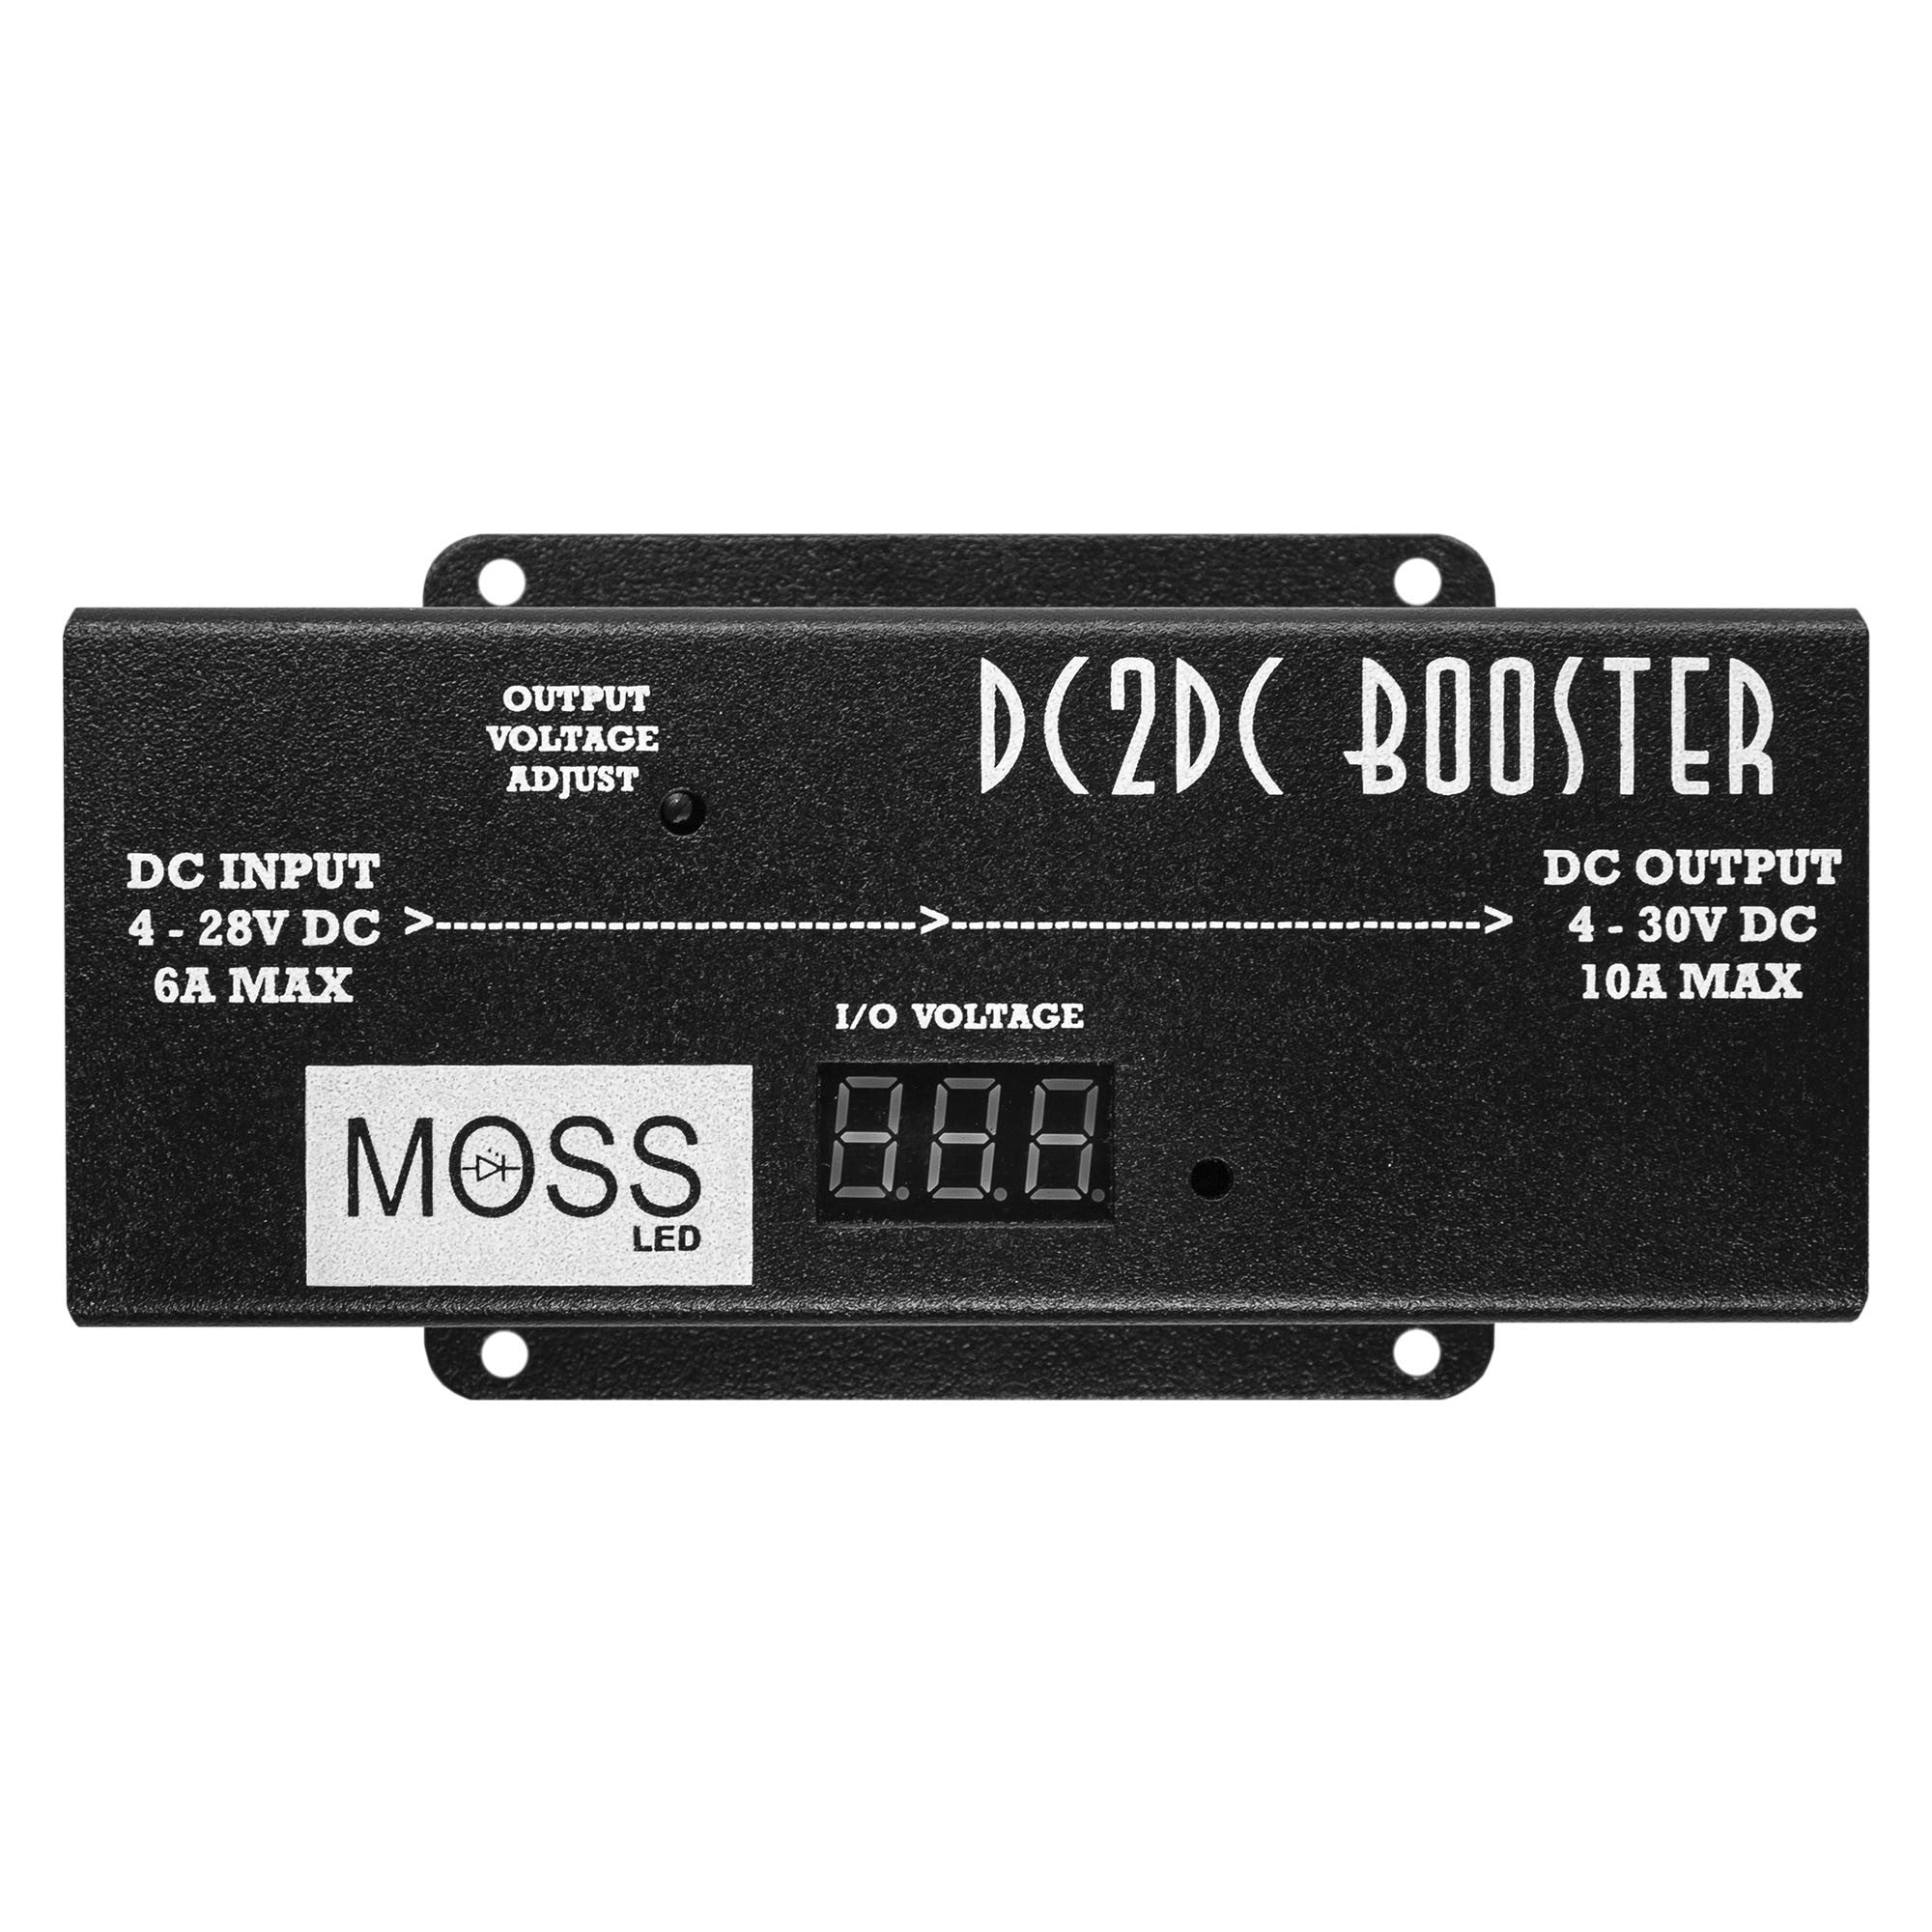 DC 2 DC Booster